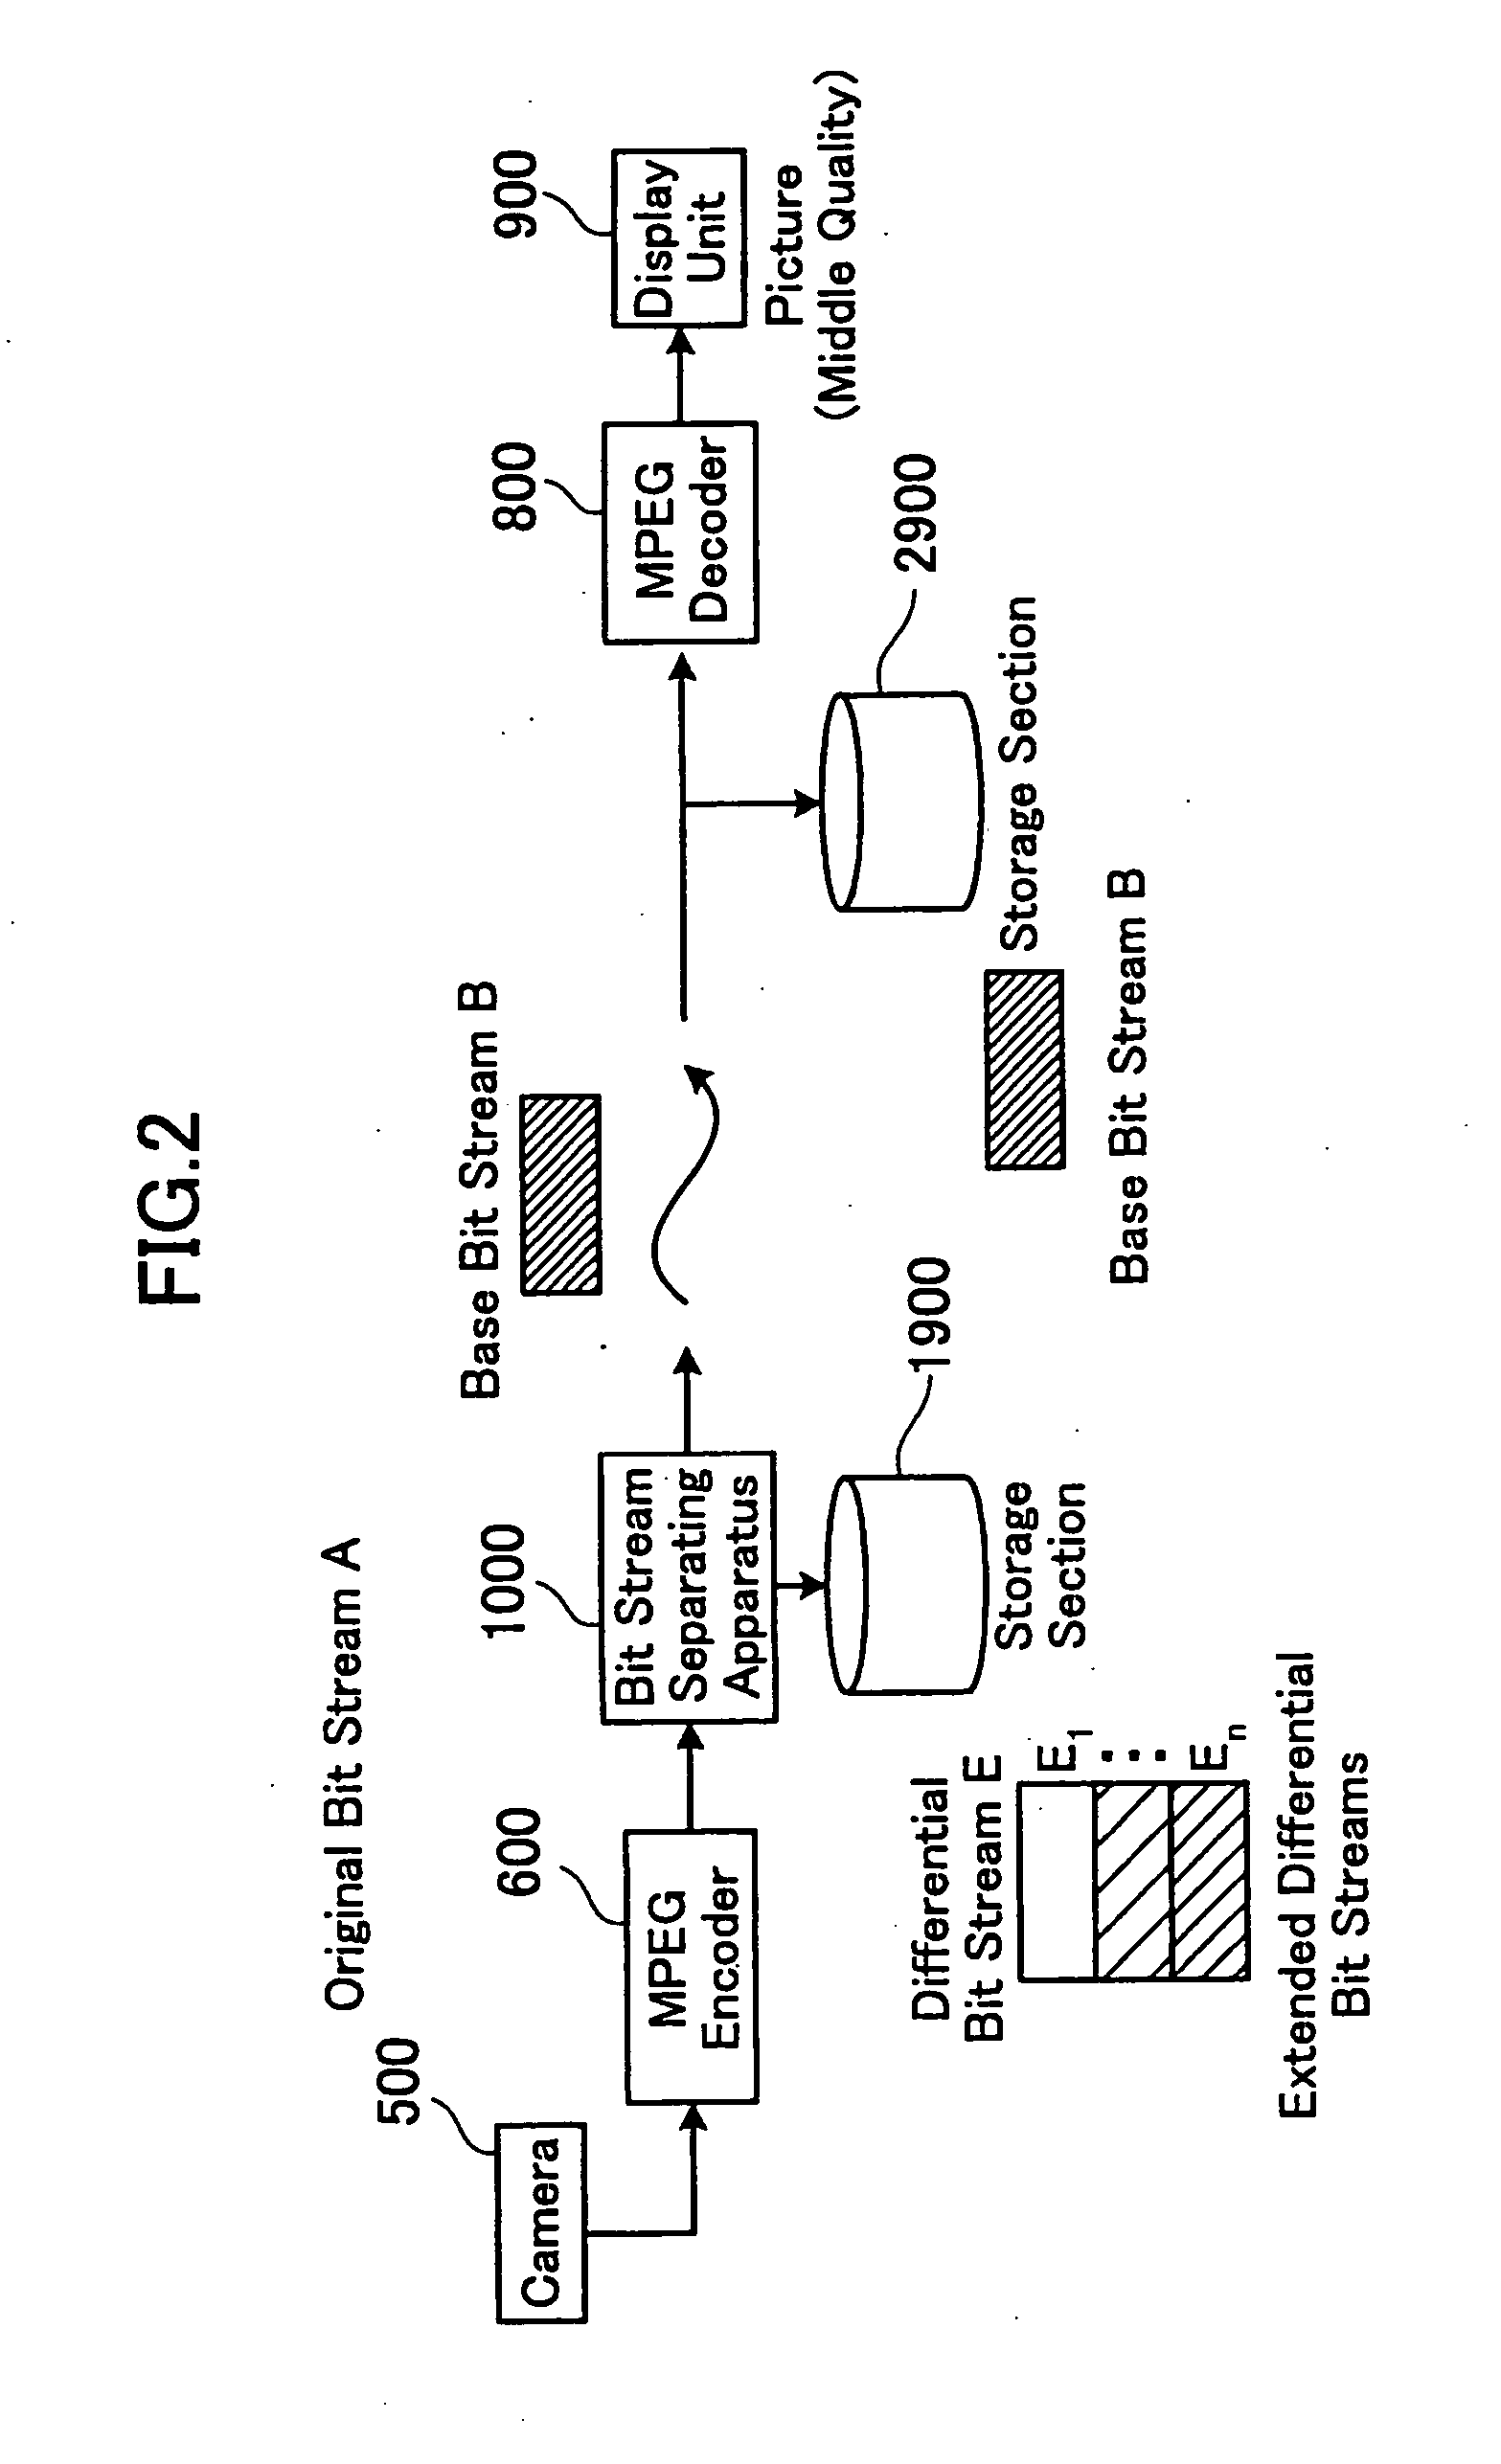 Apparatus, system for, method of and computer program product for separating and merging coded signal